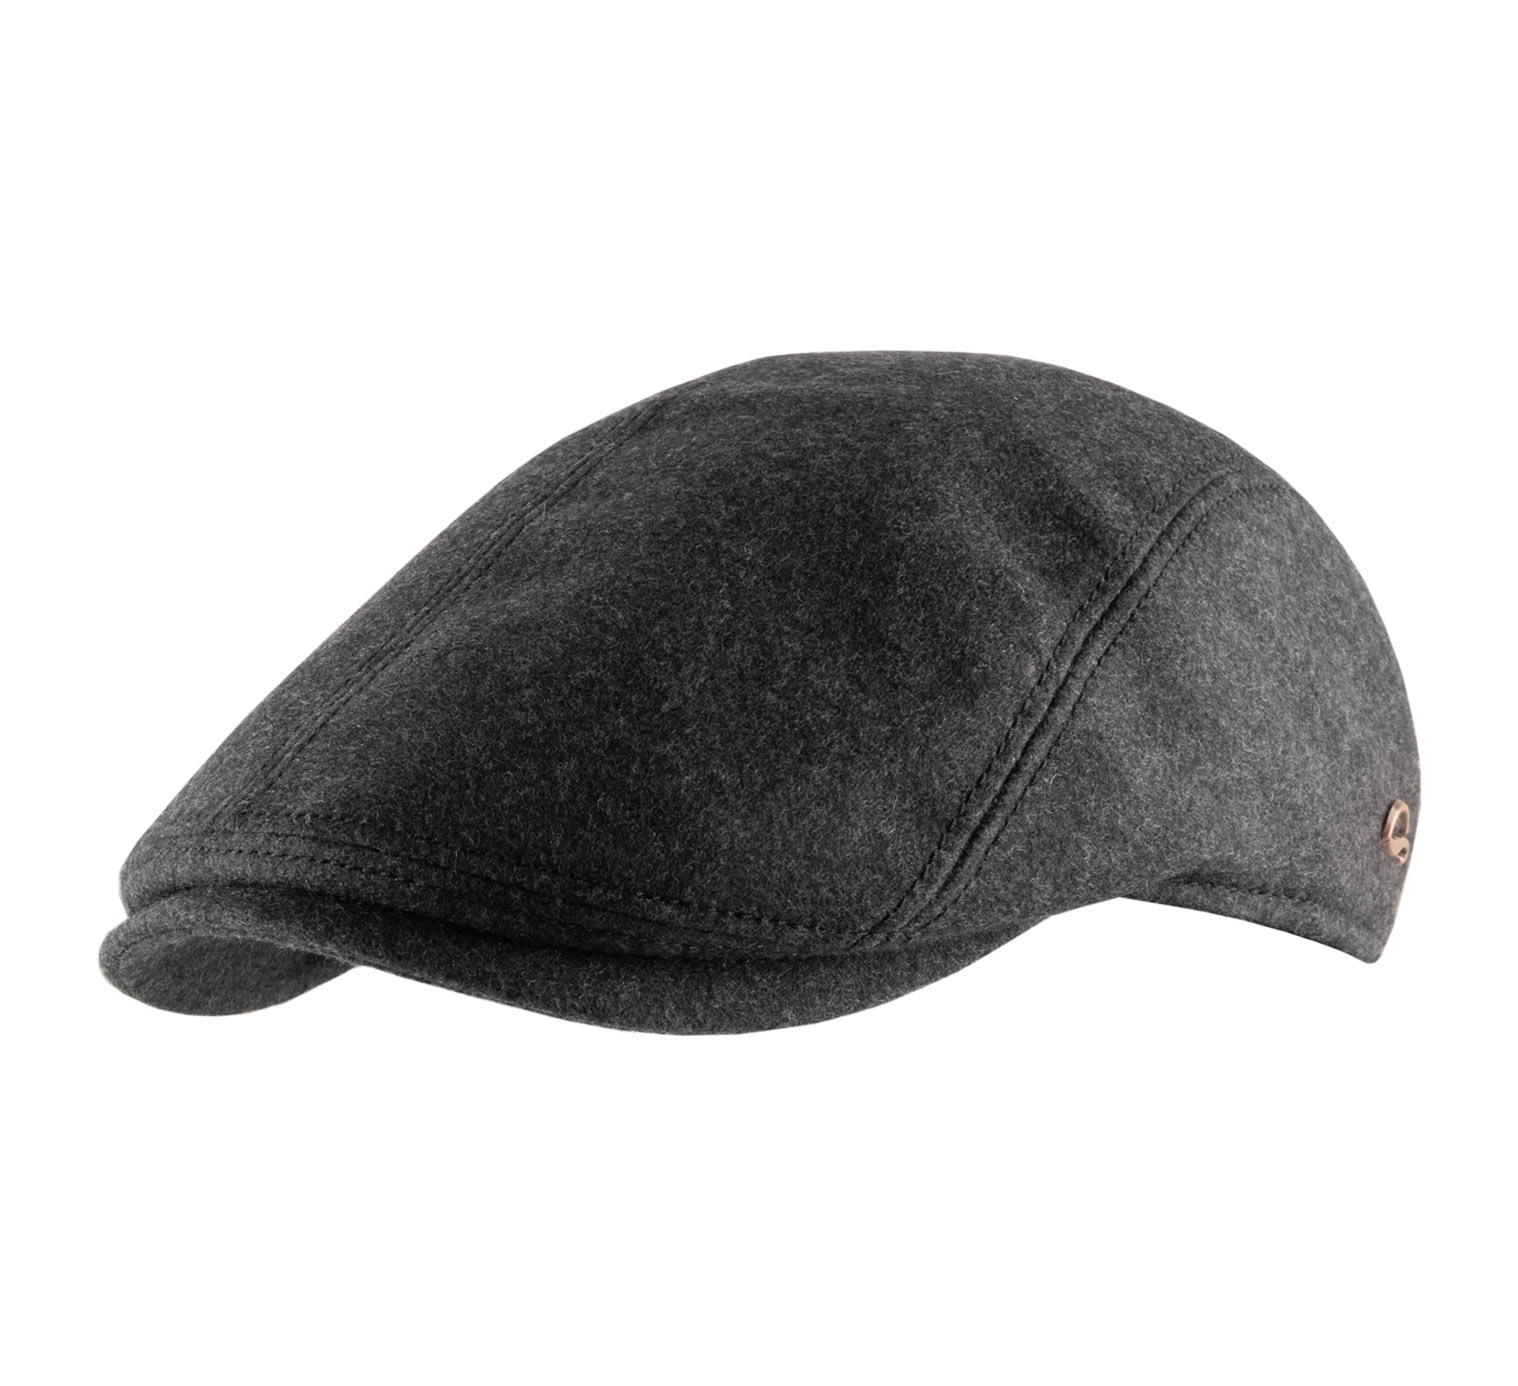 Casquette anglaise